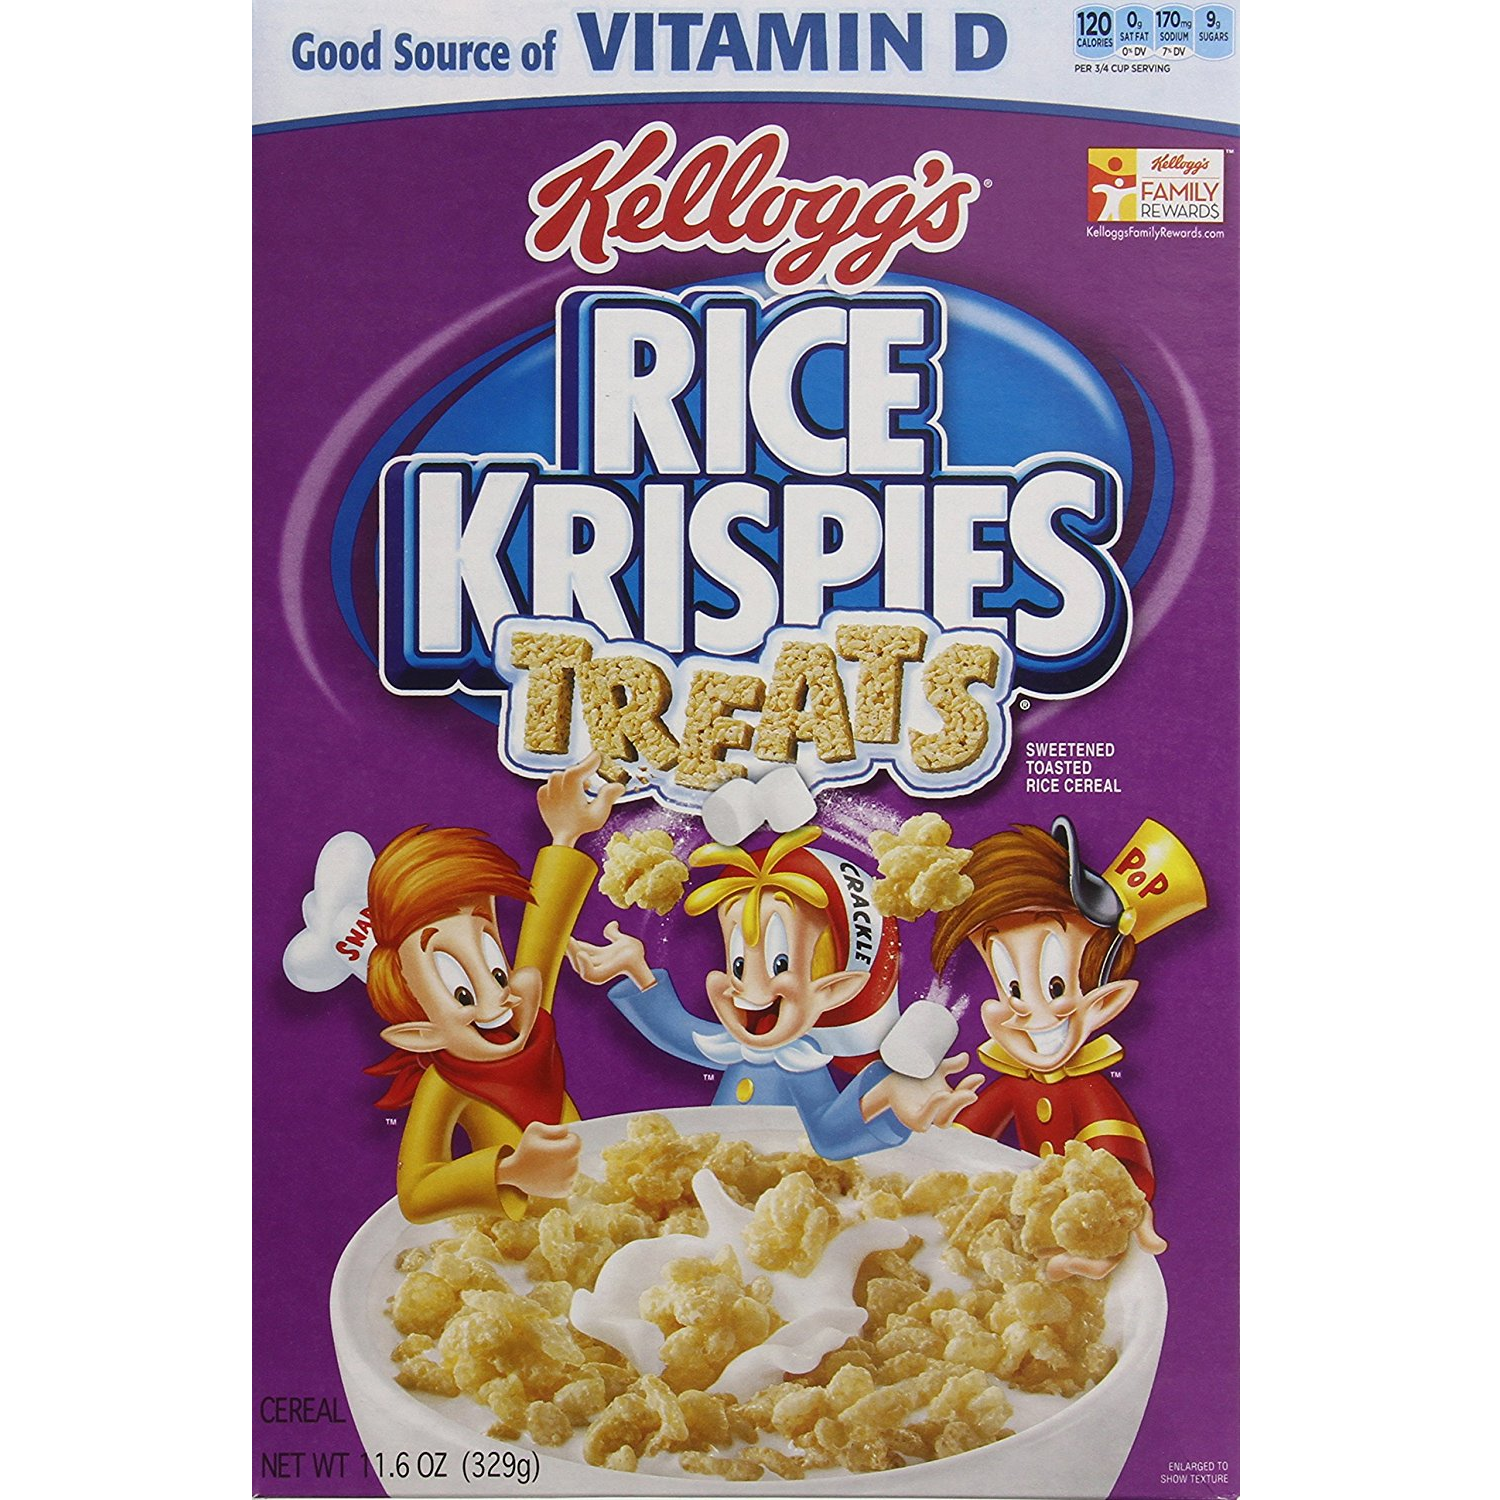 Rice Krispies Treat Cereal (11.6oz) Pack of 3 Only $8.49 Shipped!